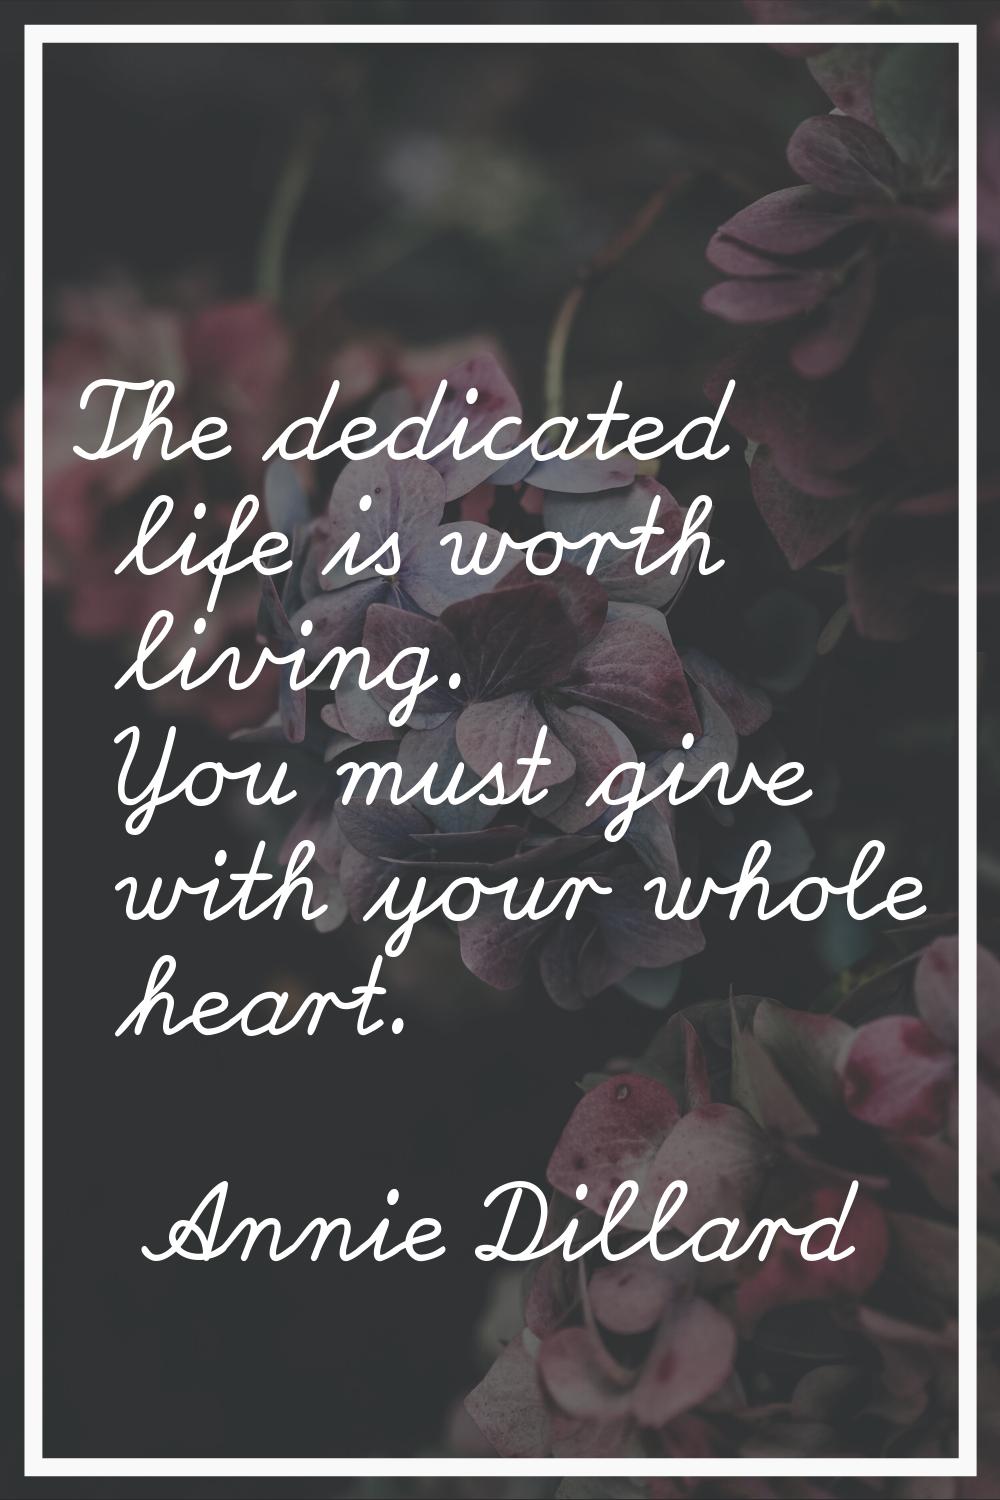 The dedicated life is worth living. You must give with your whole heart.